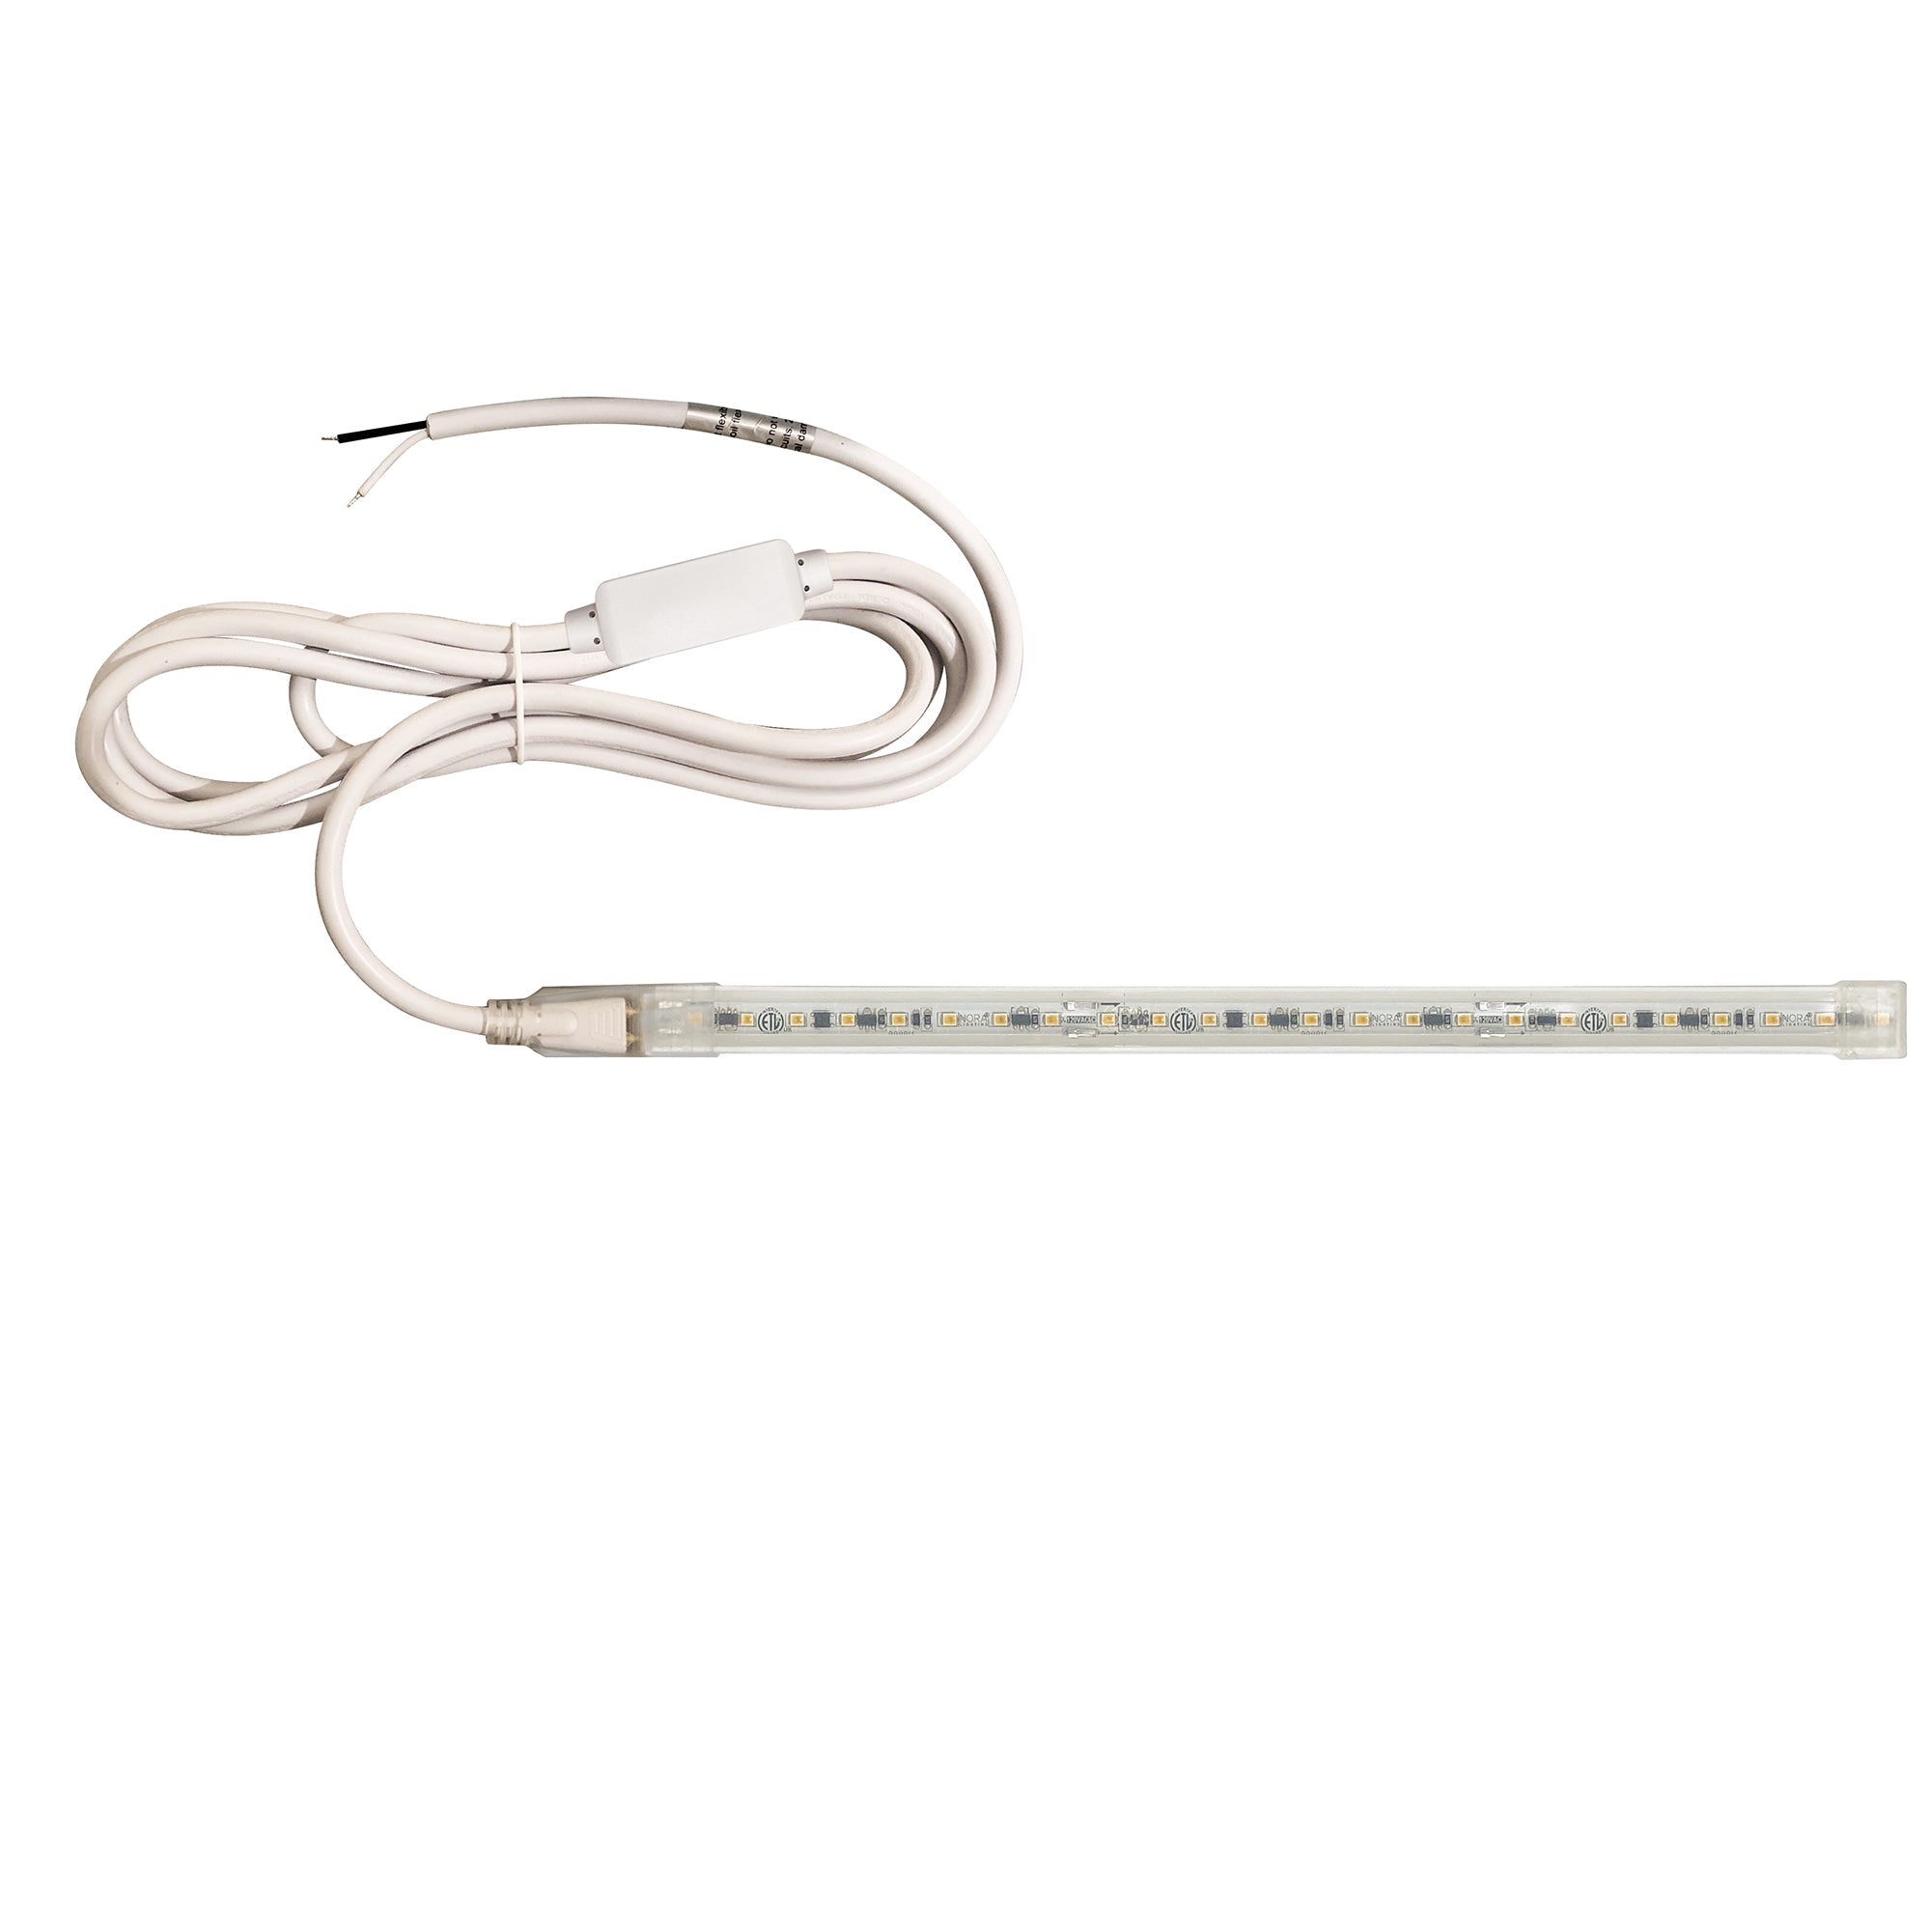 Nora Lighting NUTP13-W58-12-930/HWSP - Accent / Undercabinet - Custom Cut 58-ft 120V Continuous LED Tape Light, 330lm / 3.6W per foot, 3000K, w/ Mounting Clips and 8' Hardwired Power Cord w/ Surge Protector